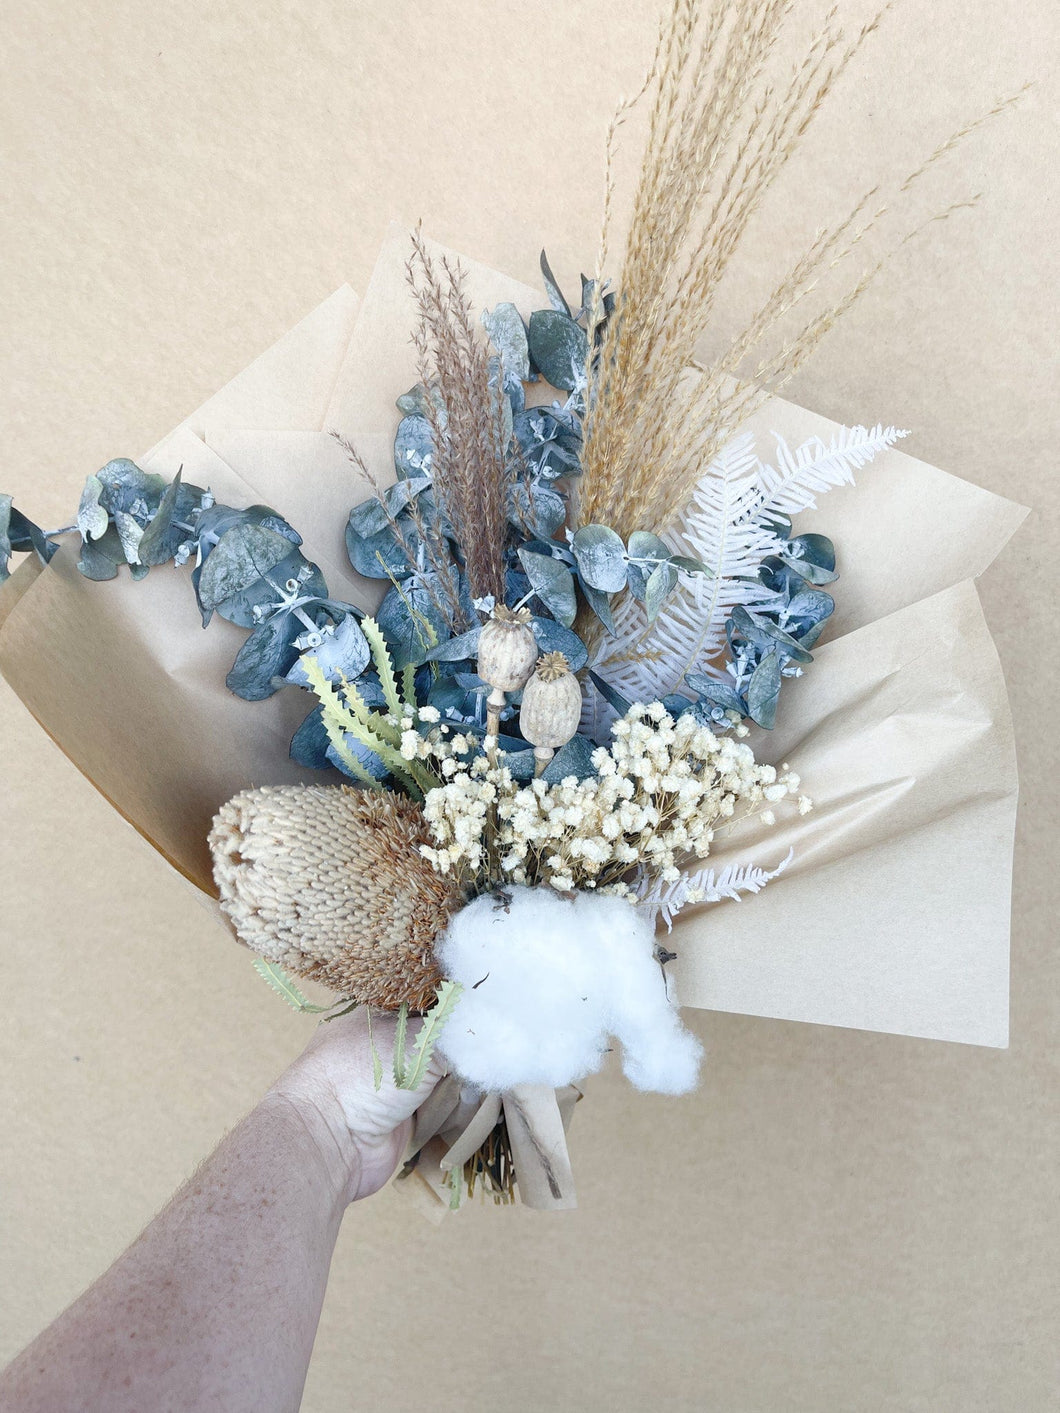 Little bunch of dried native floral arrangements- falling star